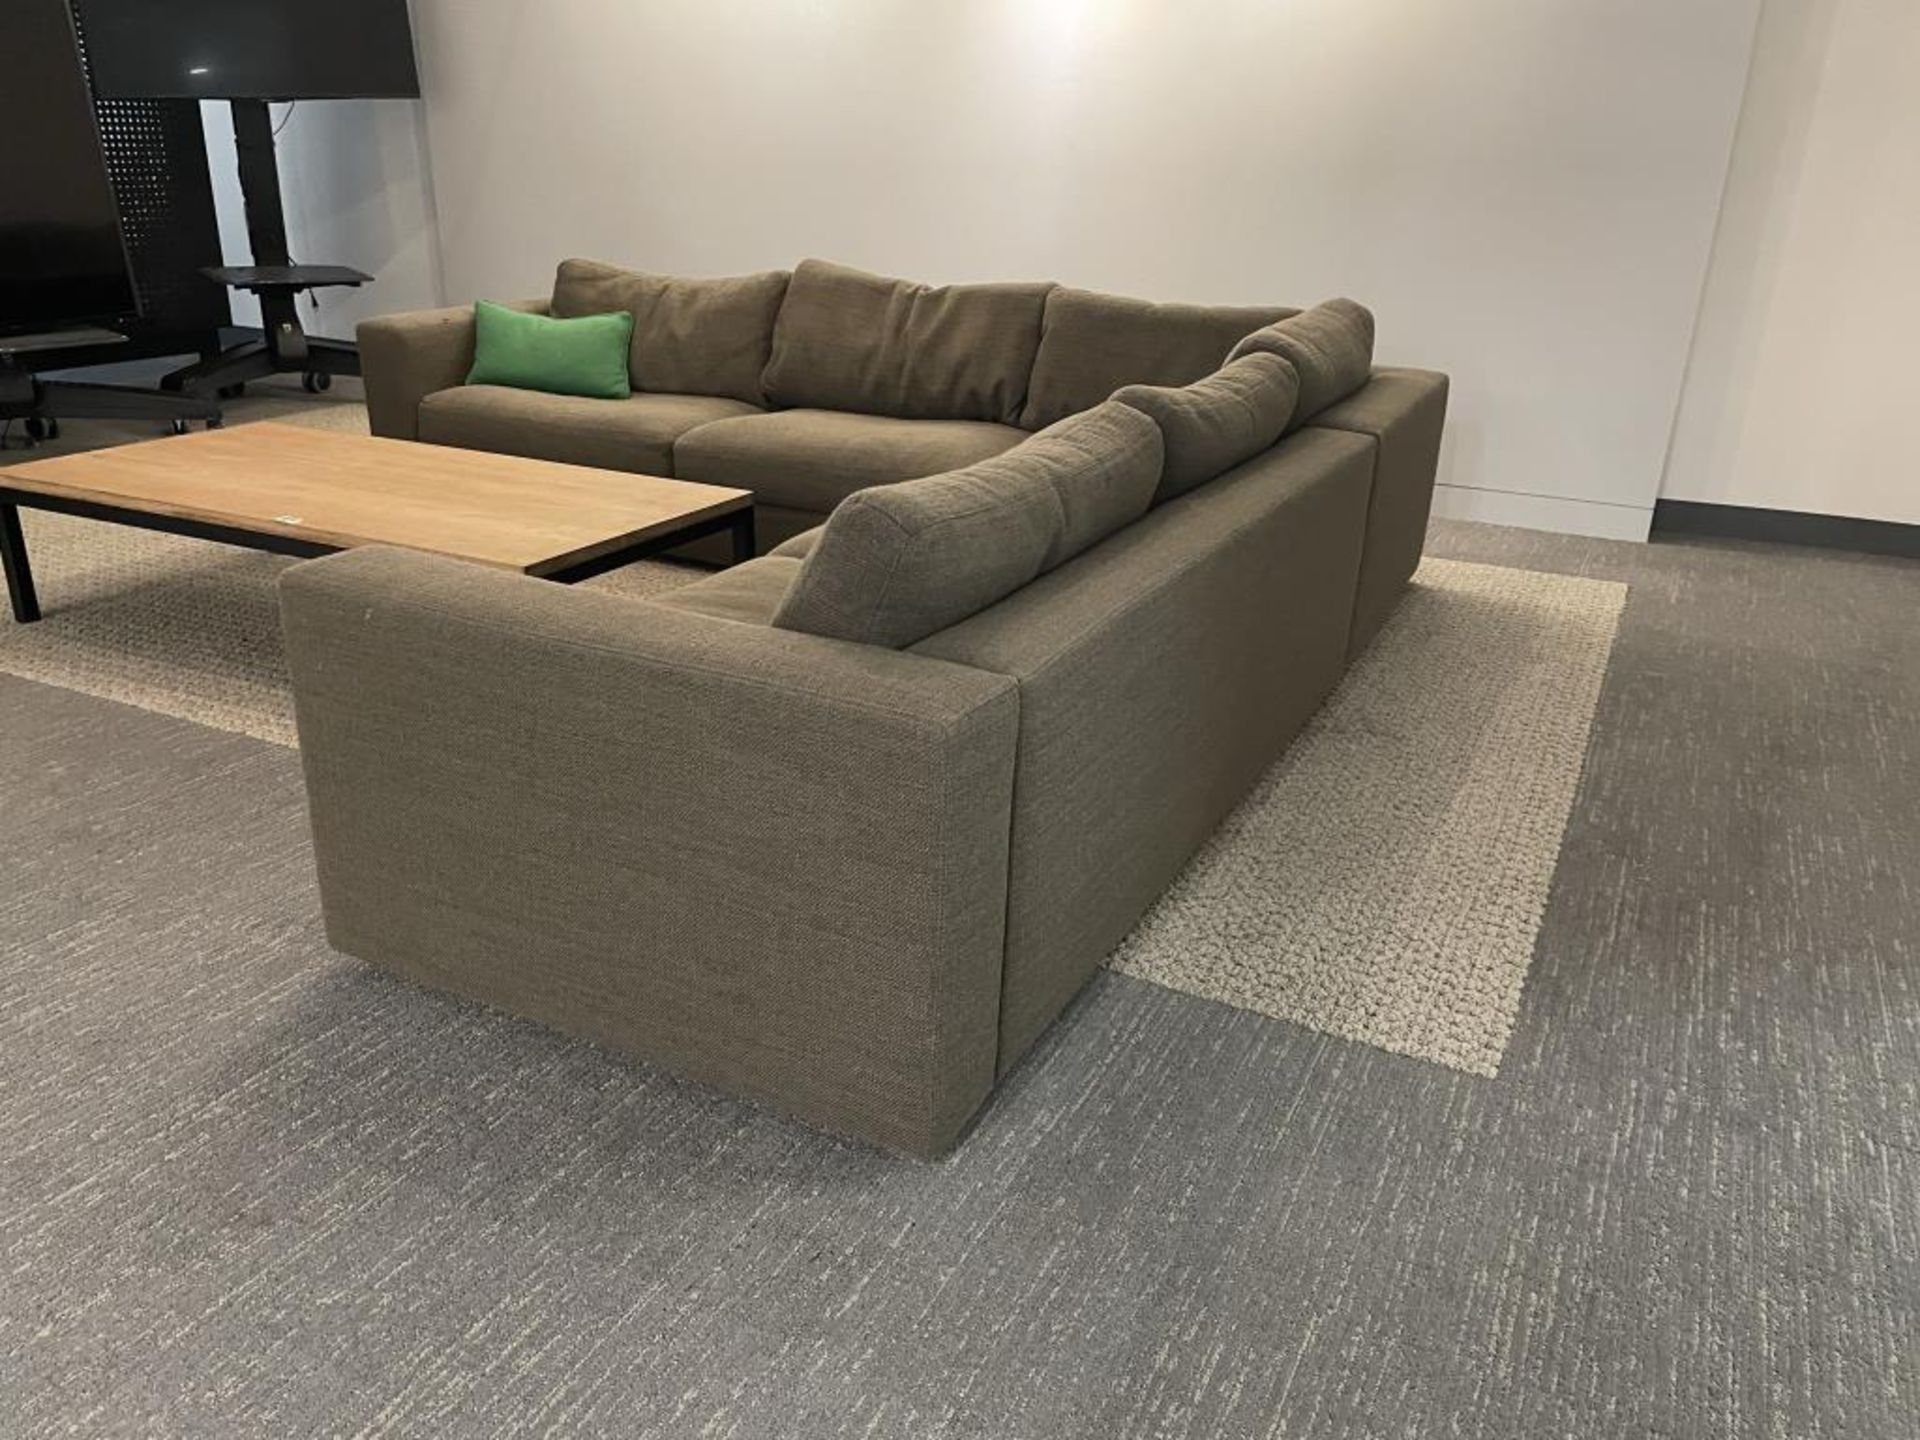 3-Sectional DWR L-Shape Couch w/ OHIO Coffee Table - Image 4 of 6